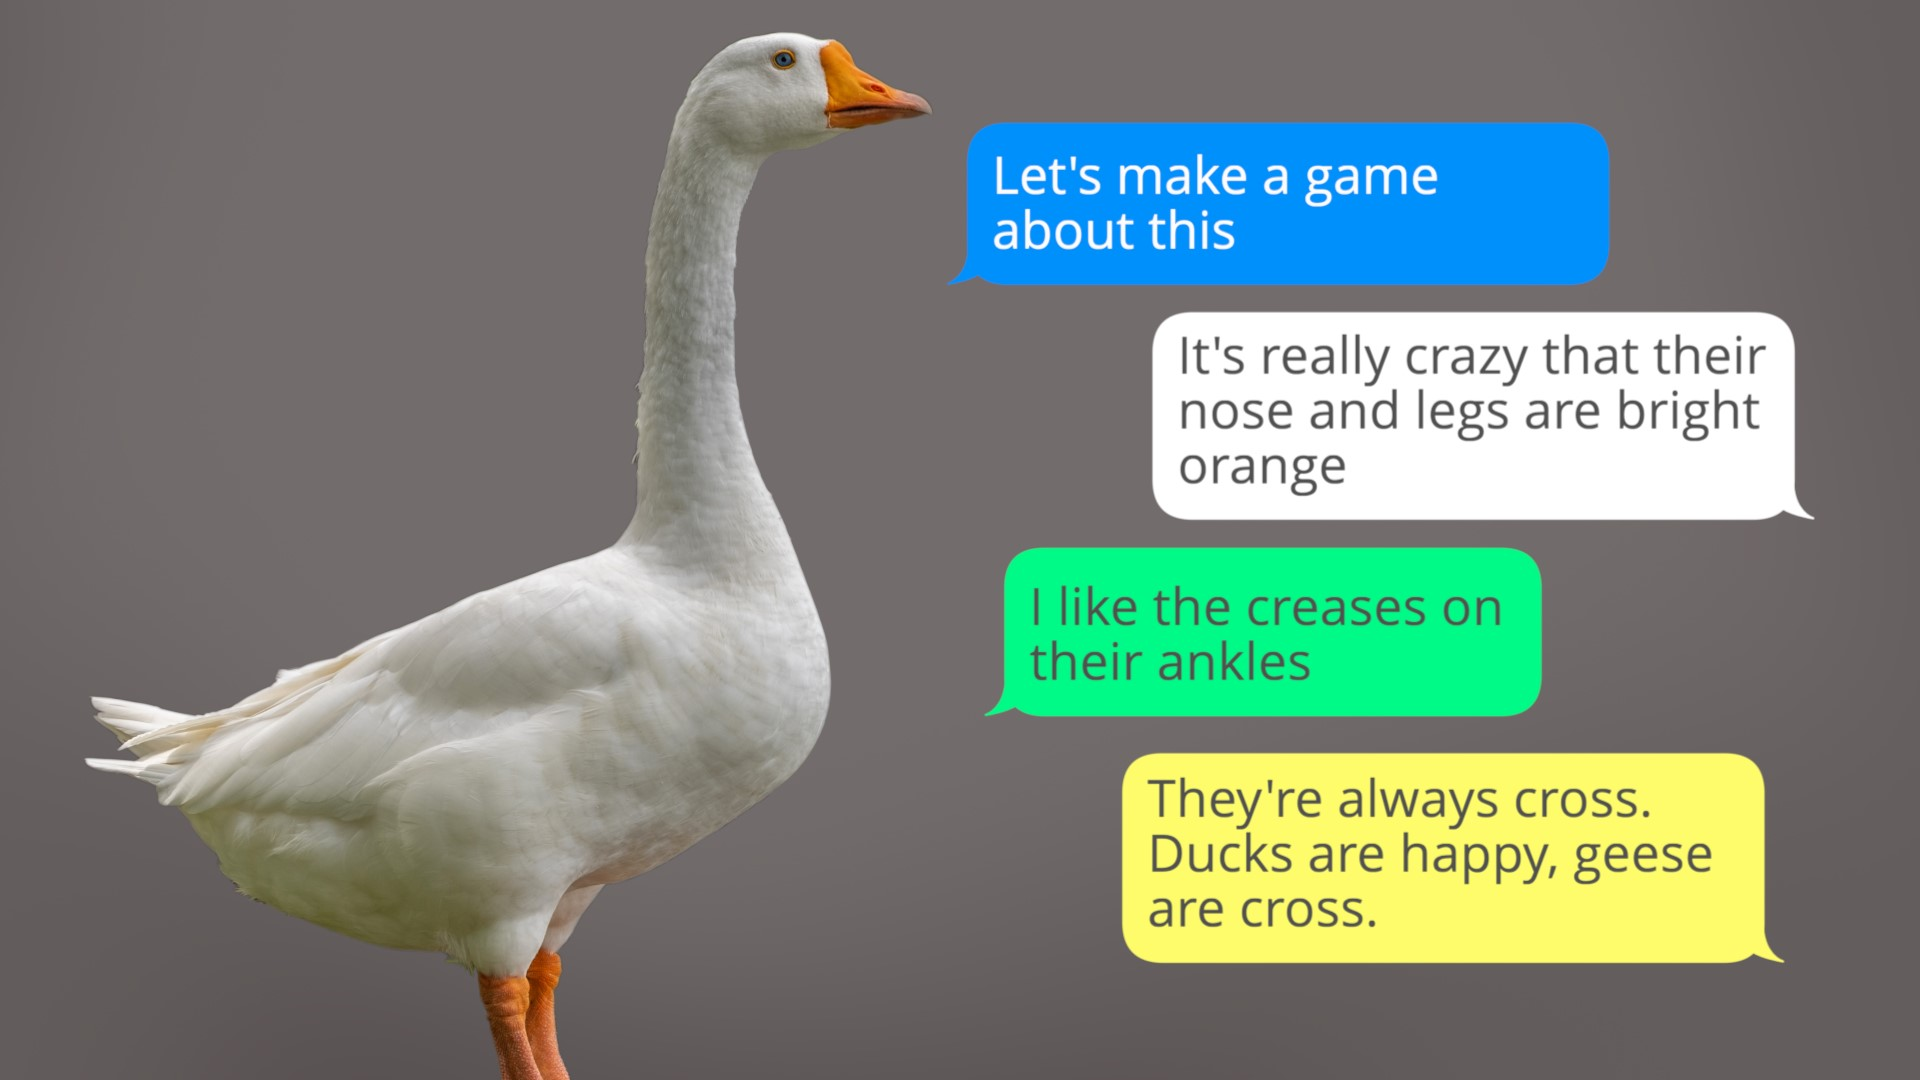 Unheadlined Goose Game interview